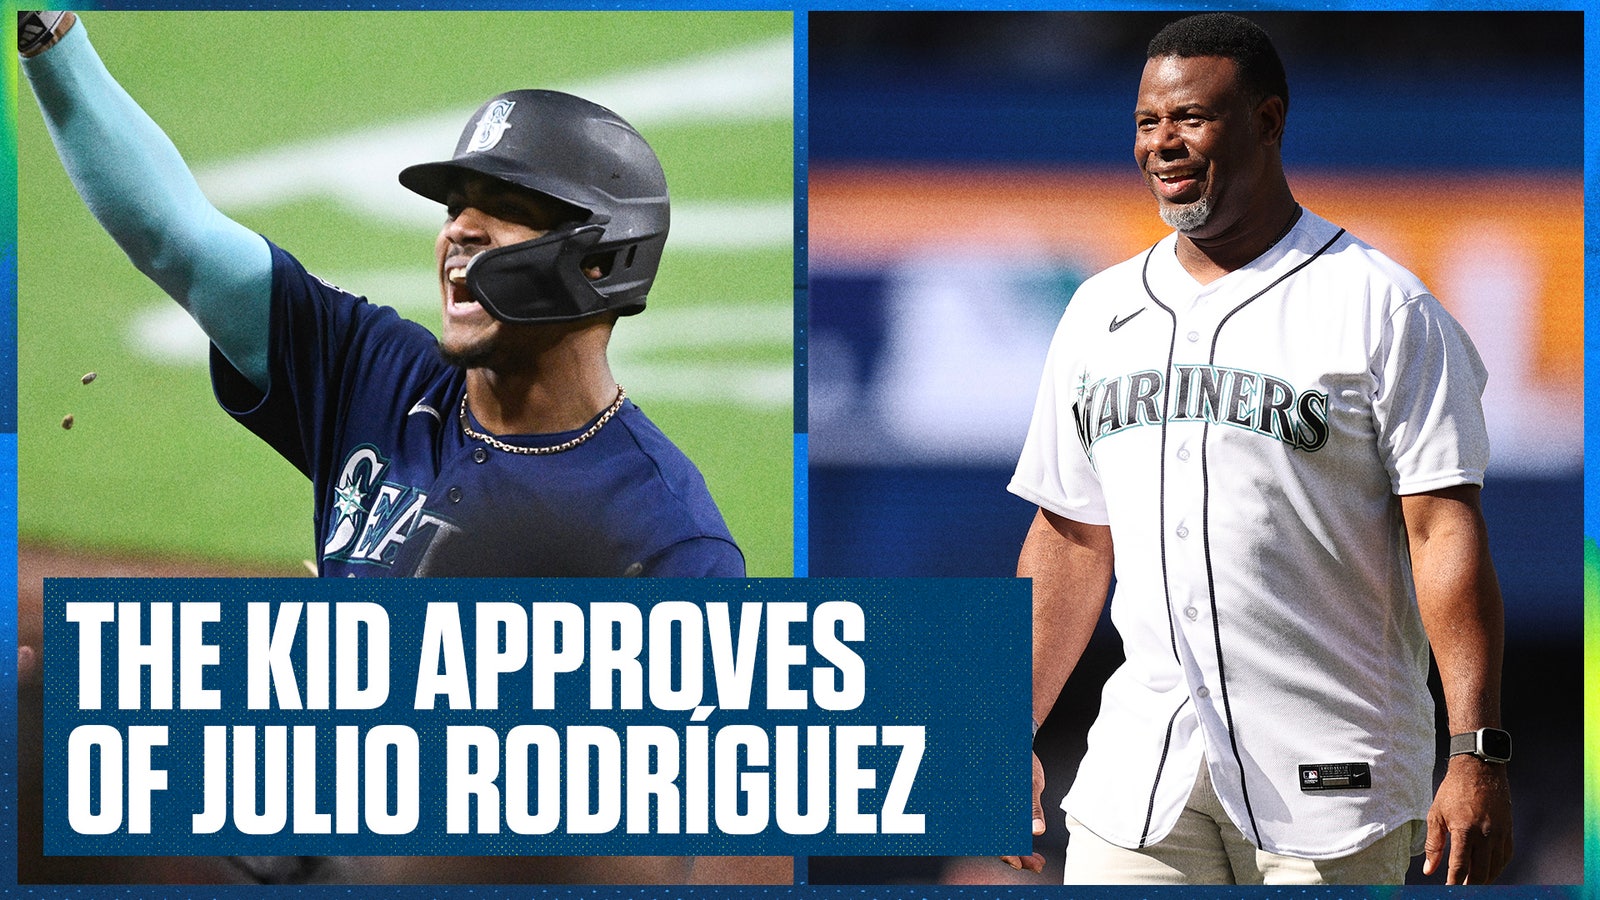 Julio Rodriguez named Rookie of the Year by Baseball America